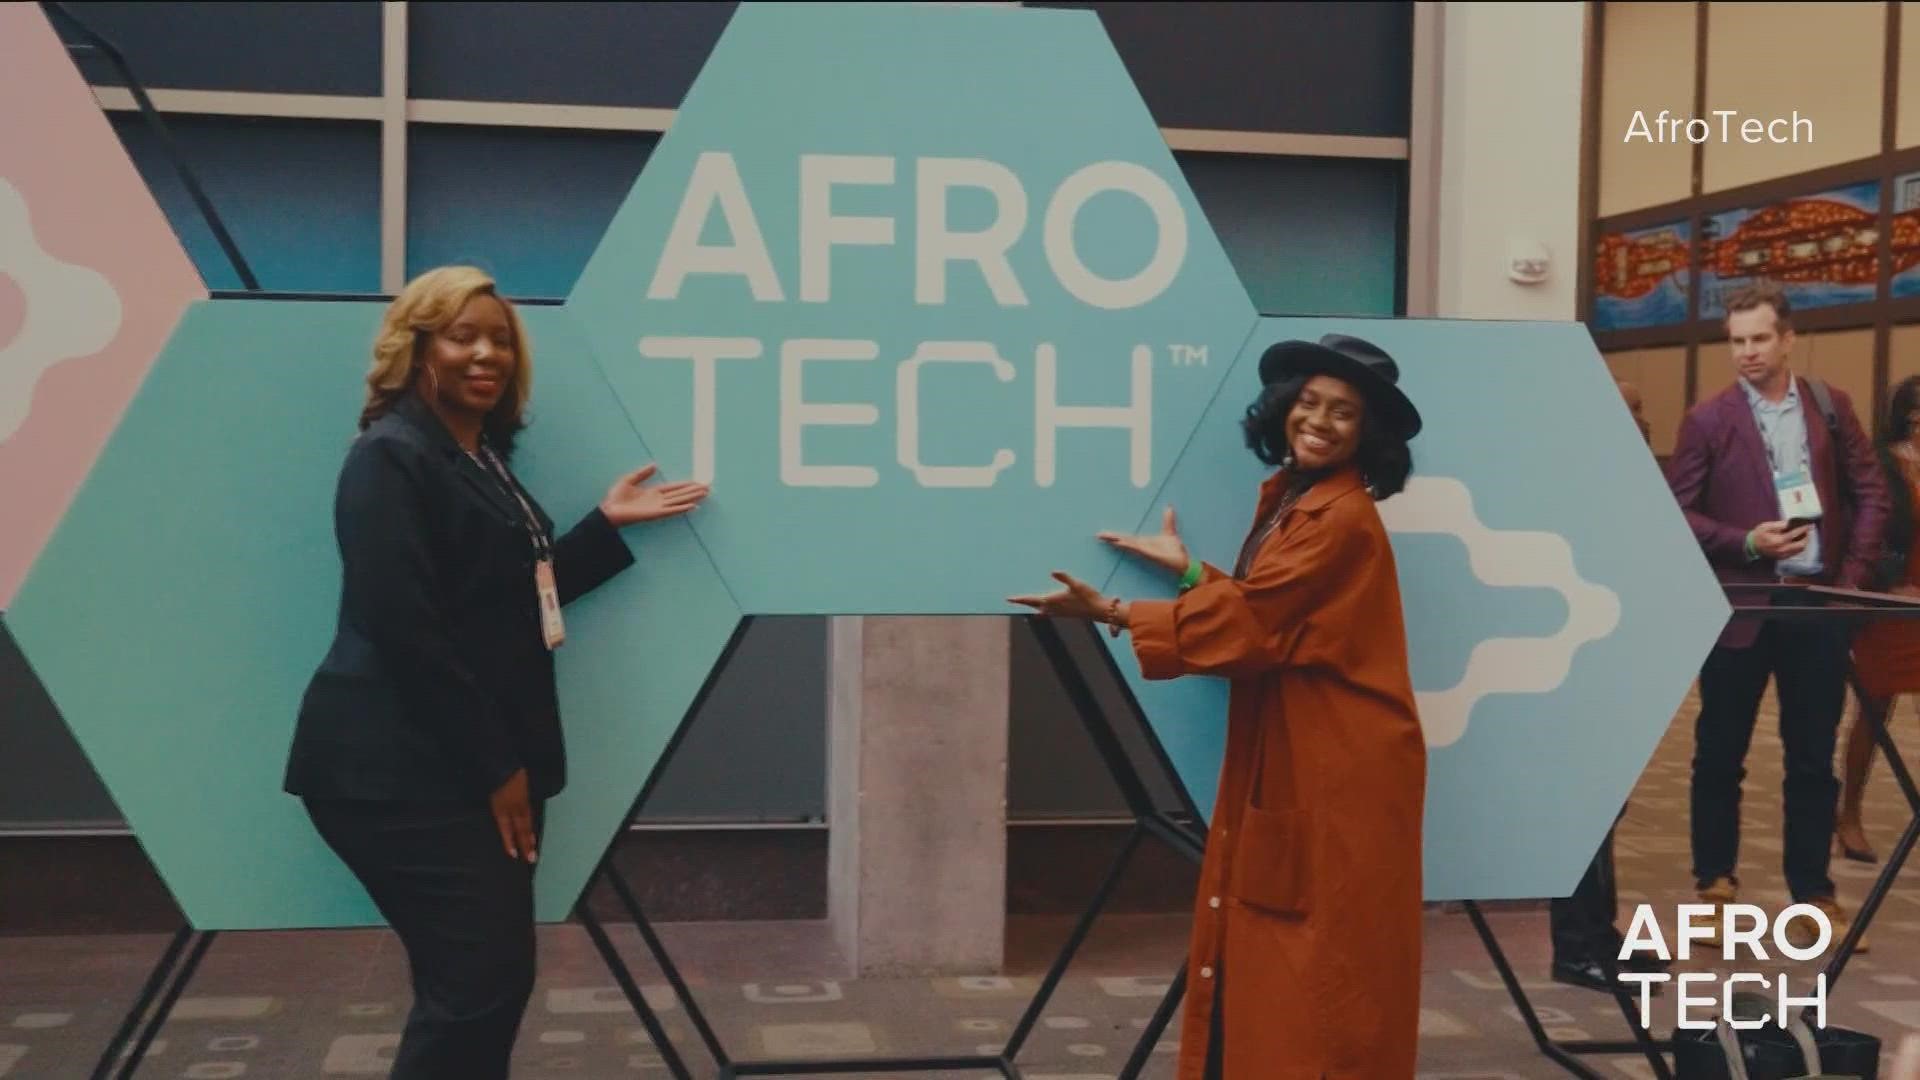 AfroTech focuses on bridging the gap between Black people and tech. It is taking over the Austin Convention Center this week.